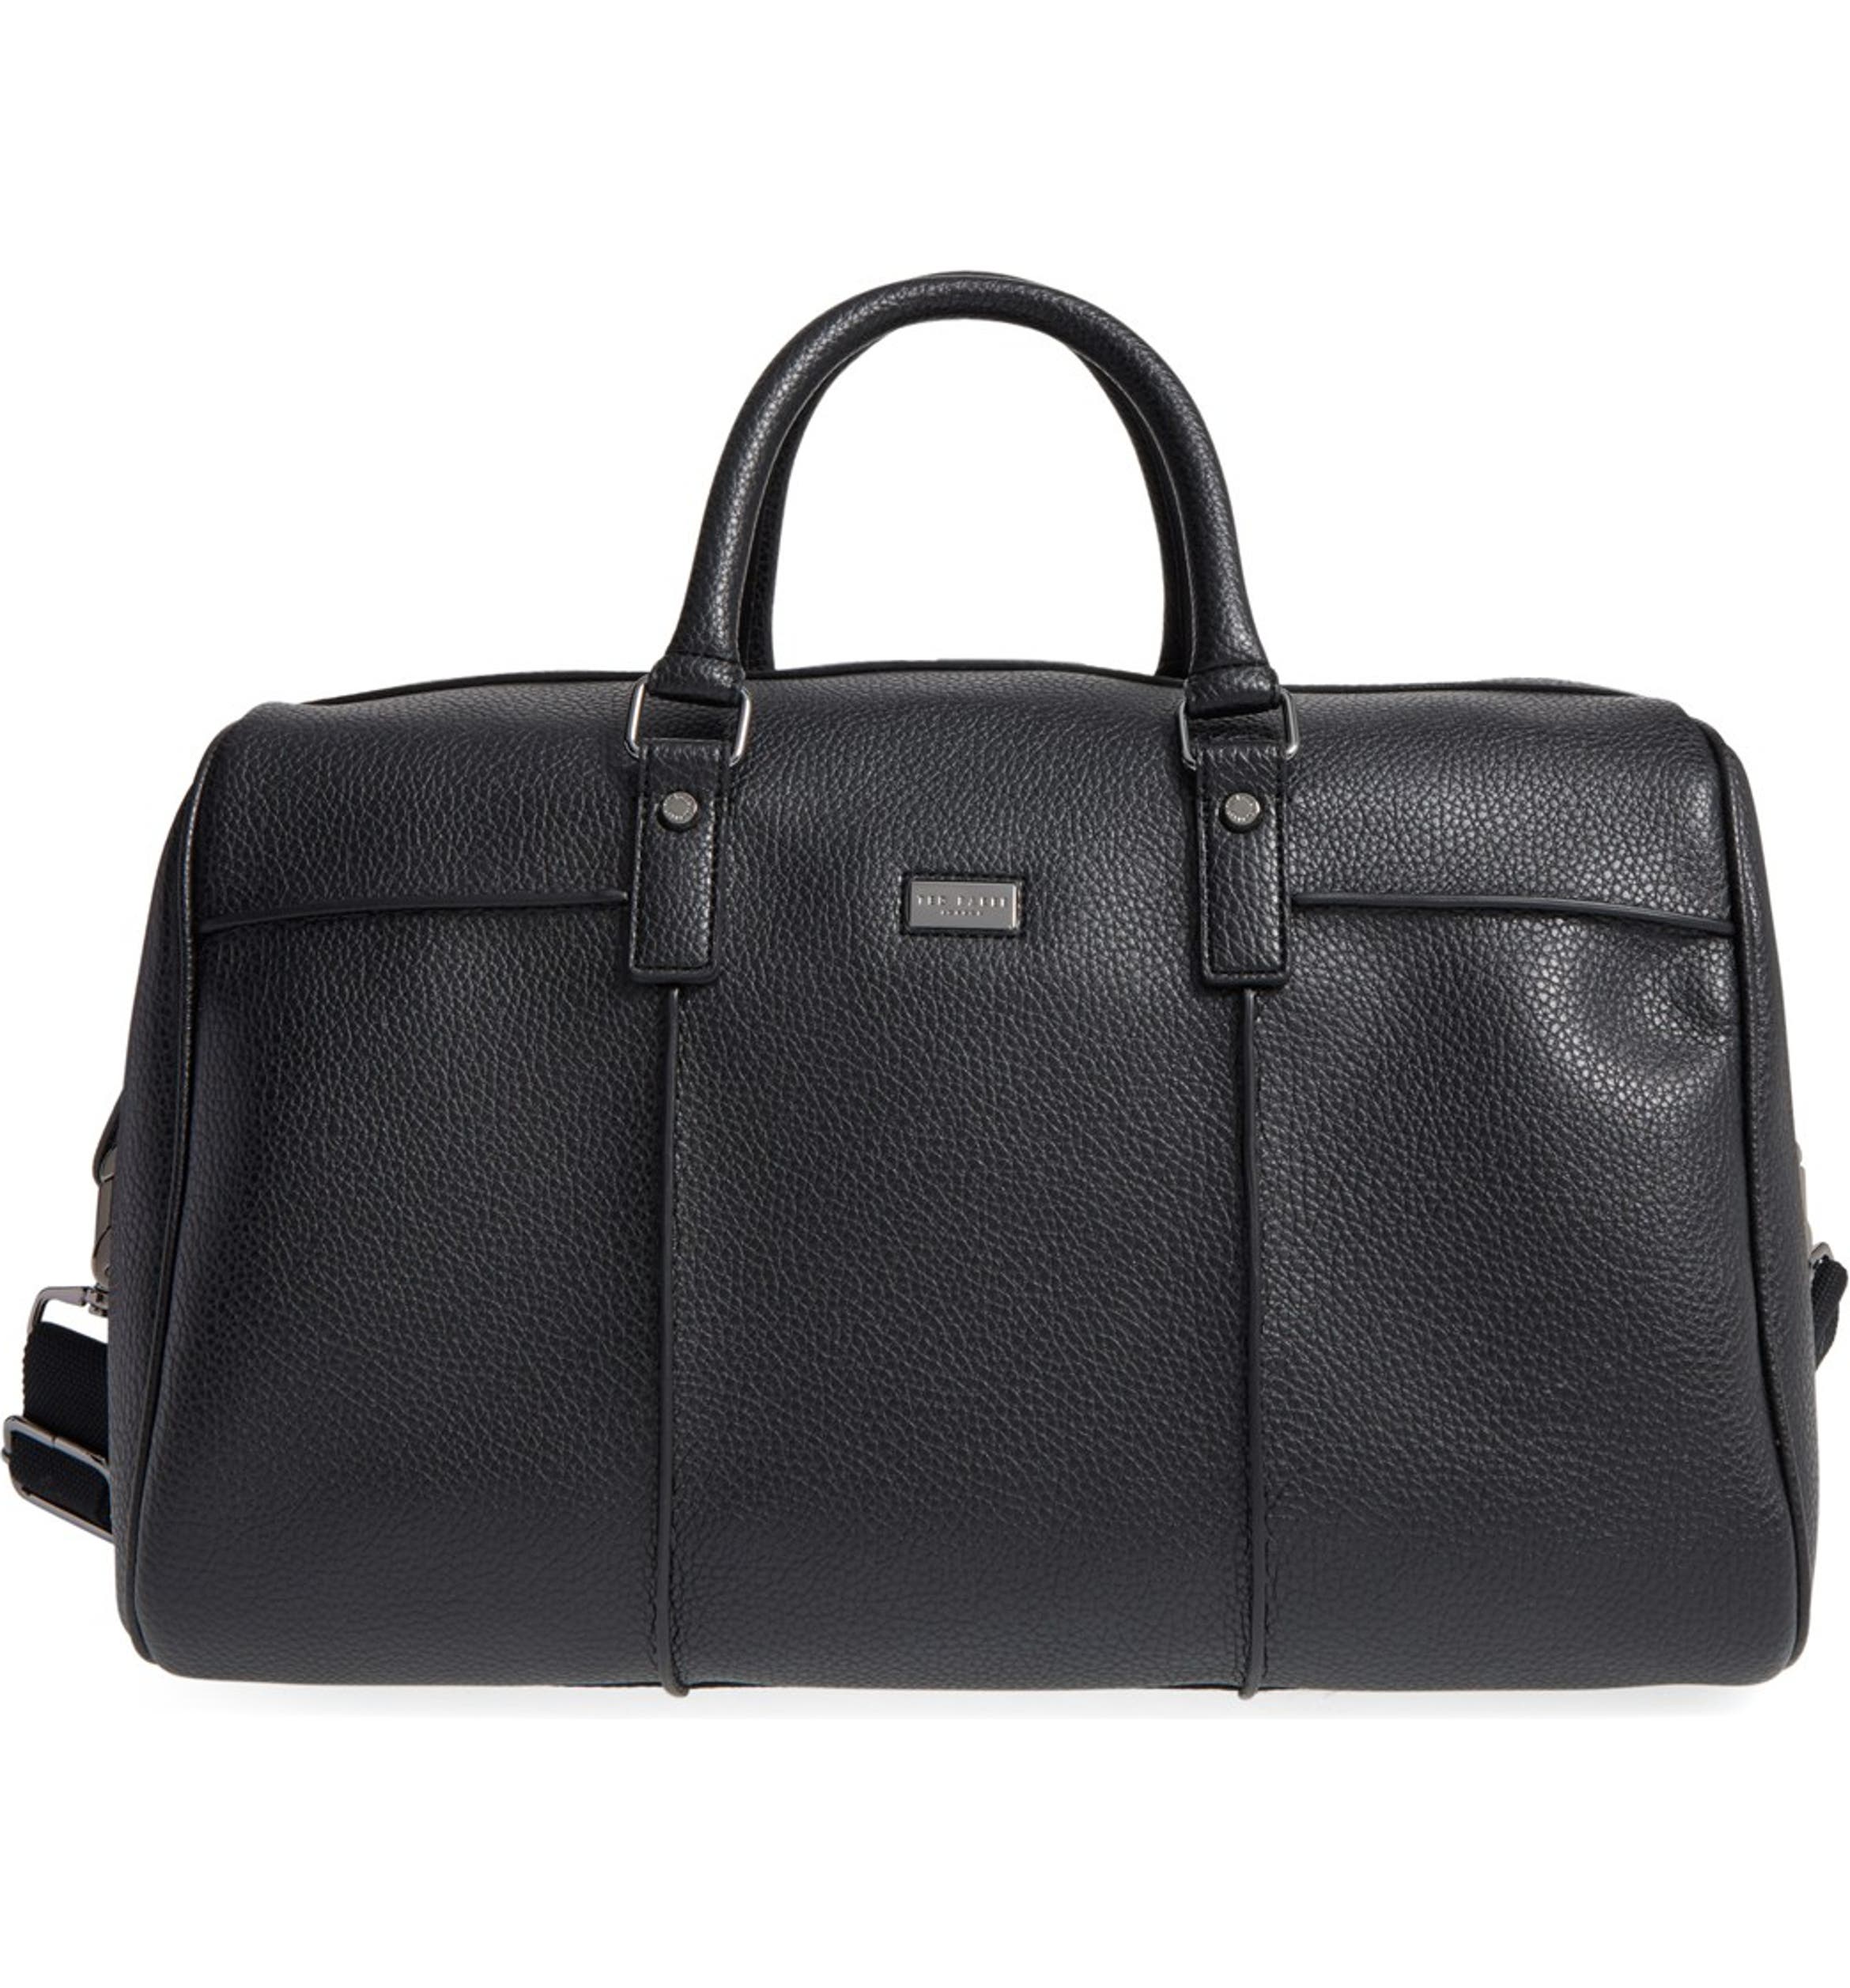 Ted Baker London 'Loyell' Faux Leather Duffel Bag | Nordstrom